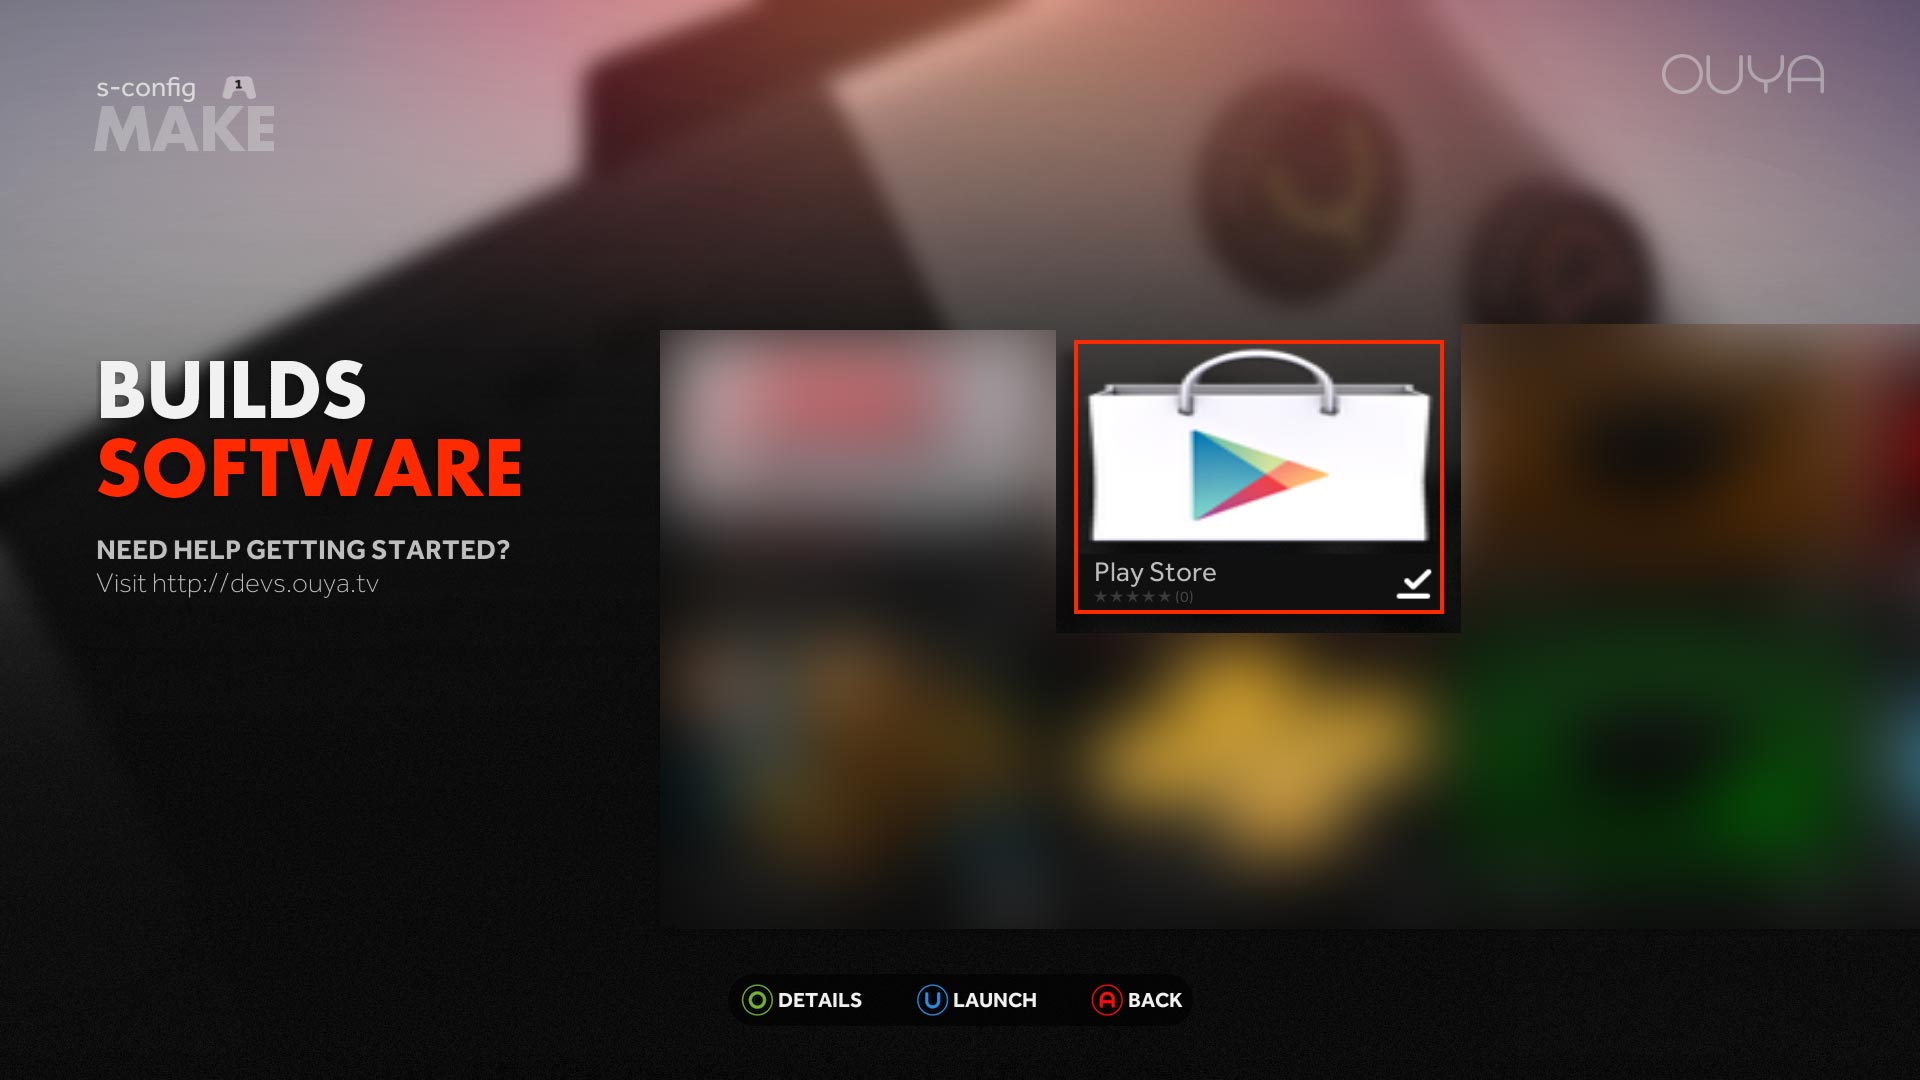 Google Play Store on the Ouya complete.